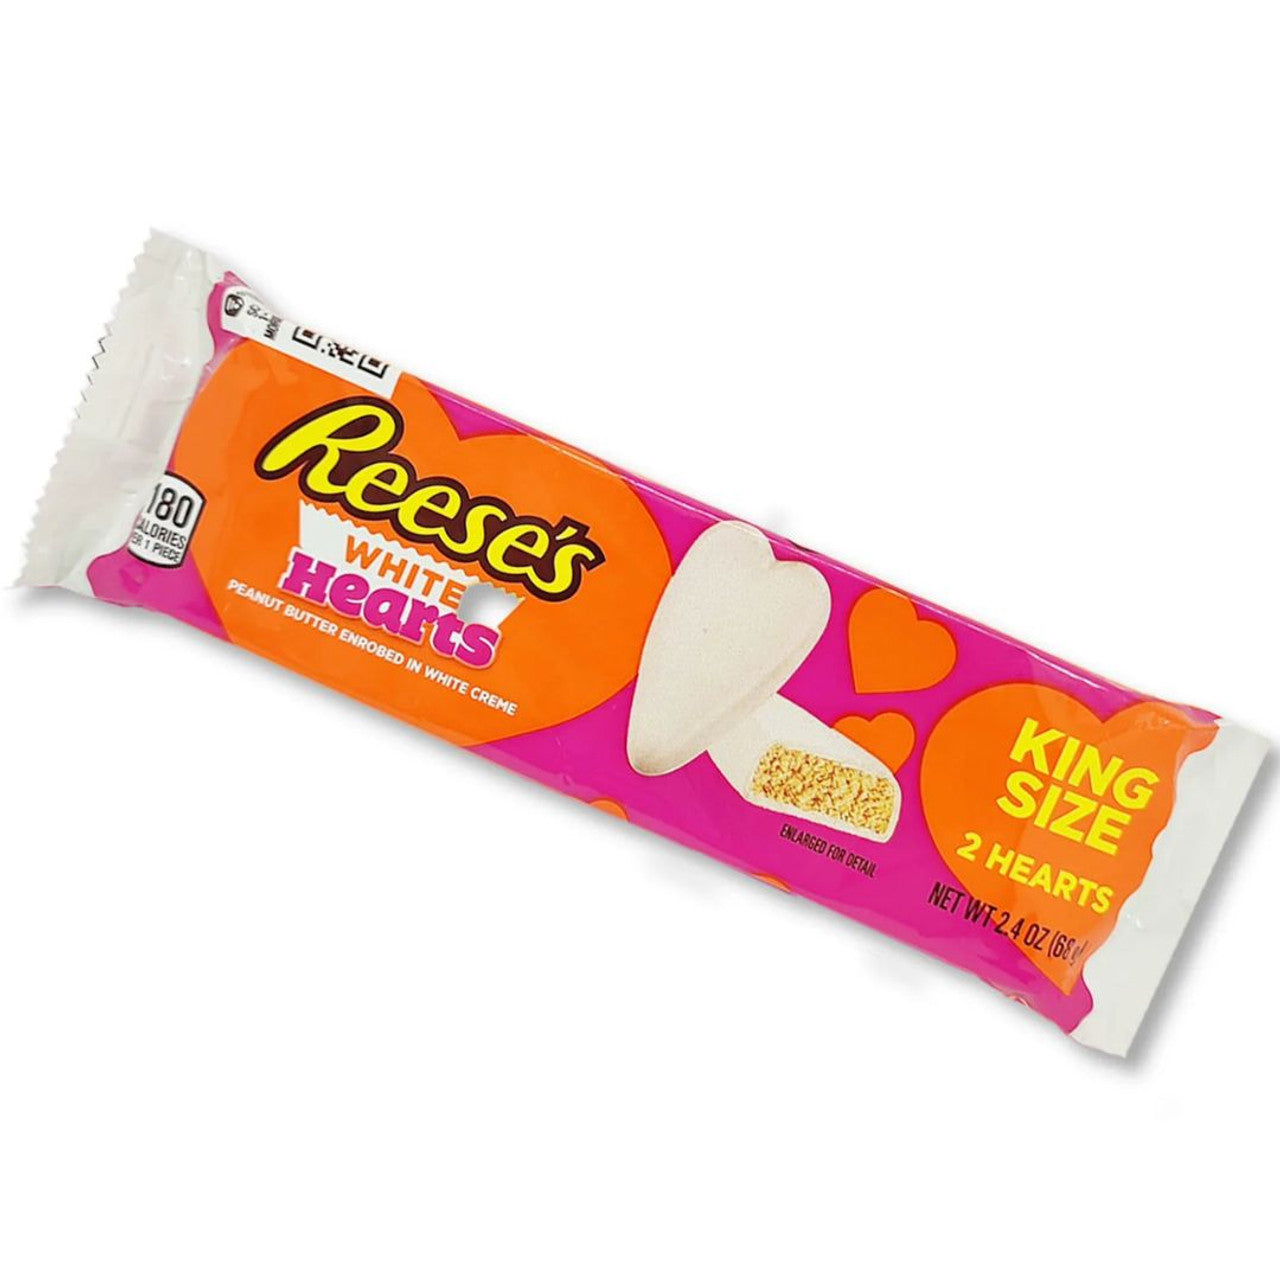 Reese's White Peanut Butter Valentine's Day Hearts King Size